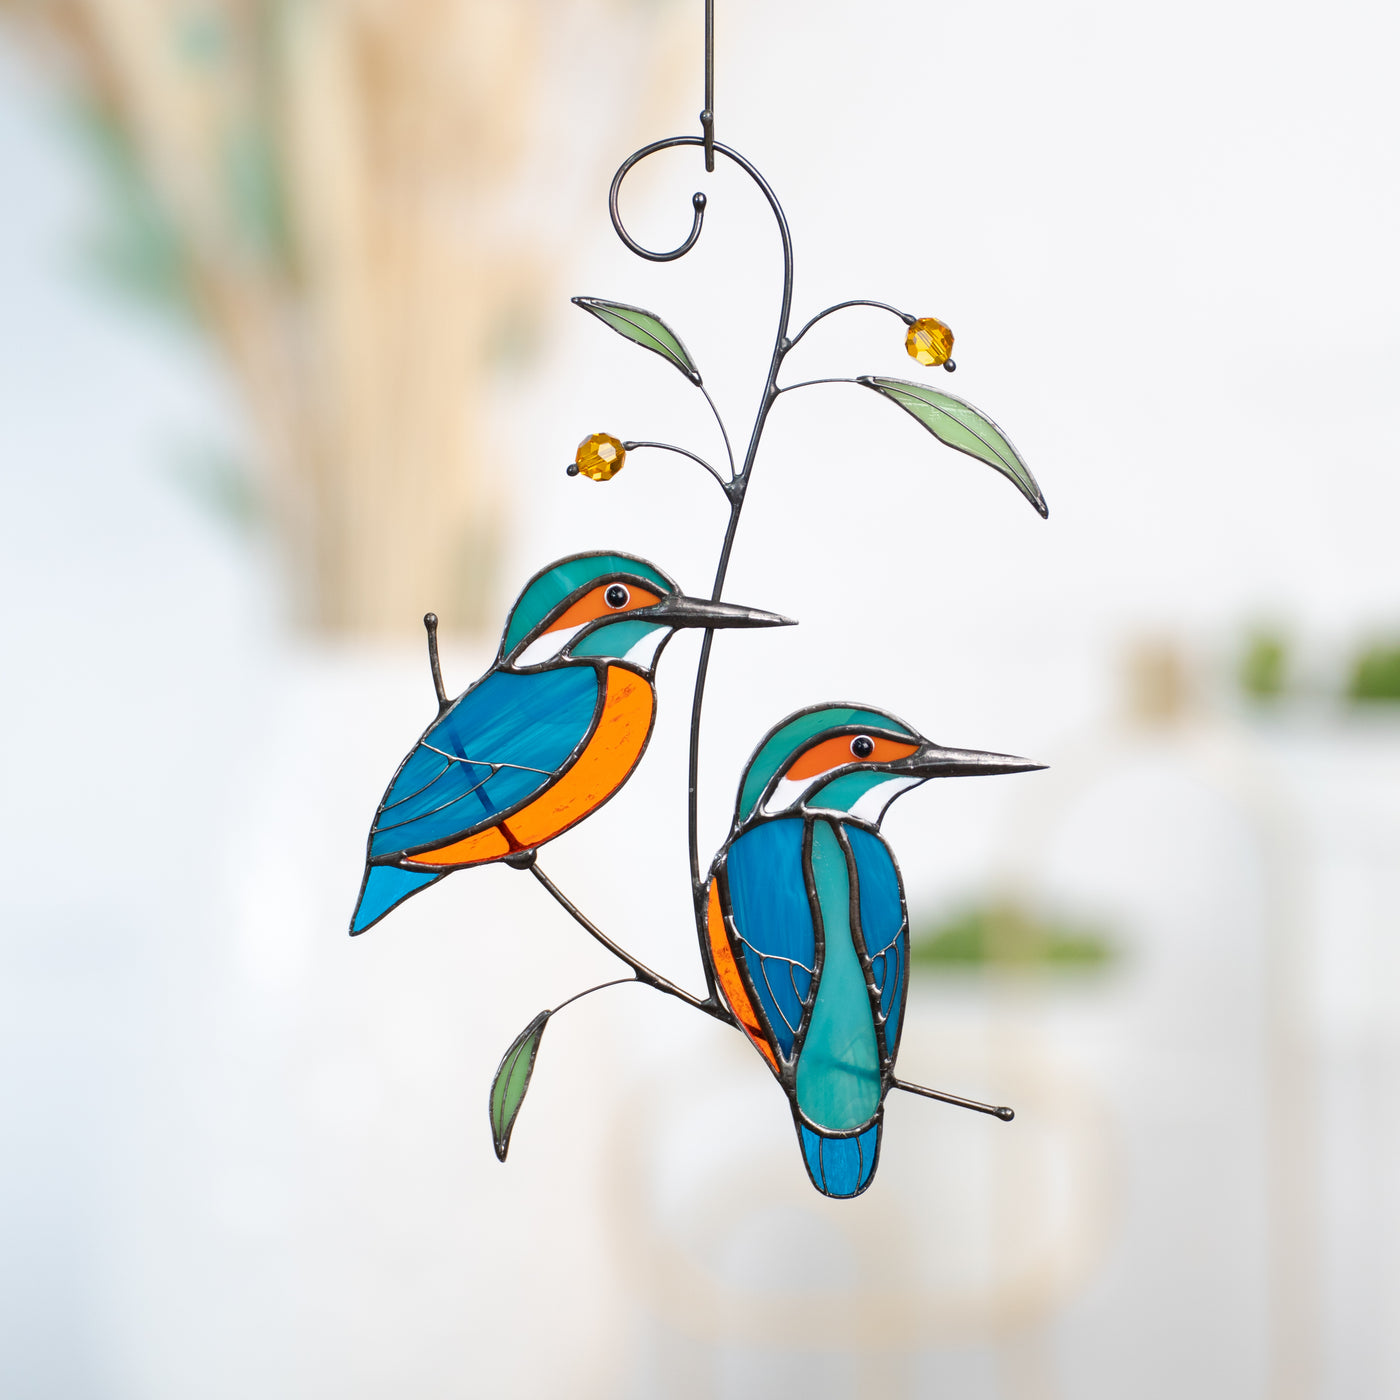 Stained glass suncatcher of two kingfishers sitting on the branch with leaves and berries 